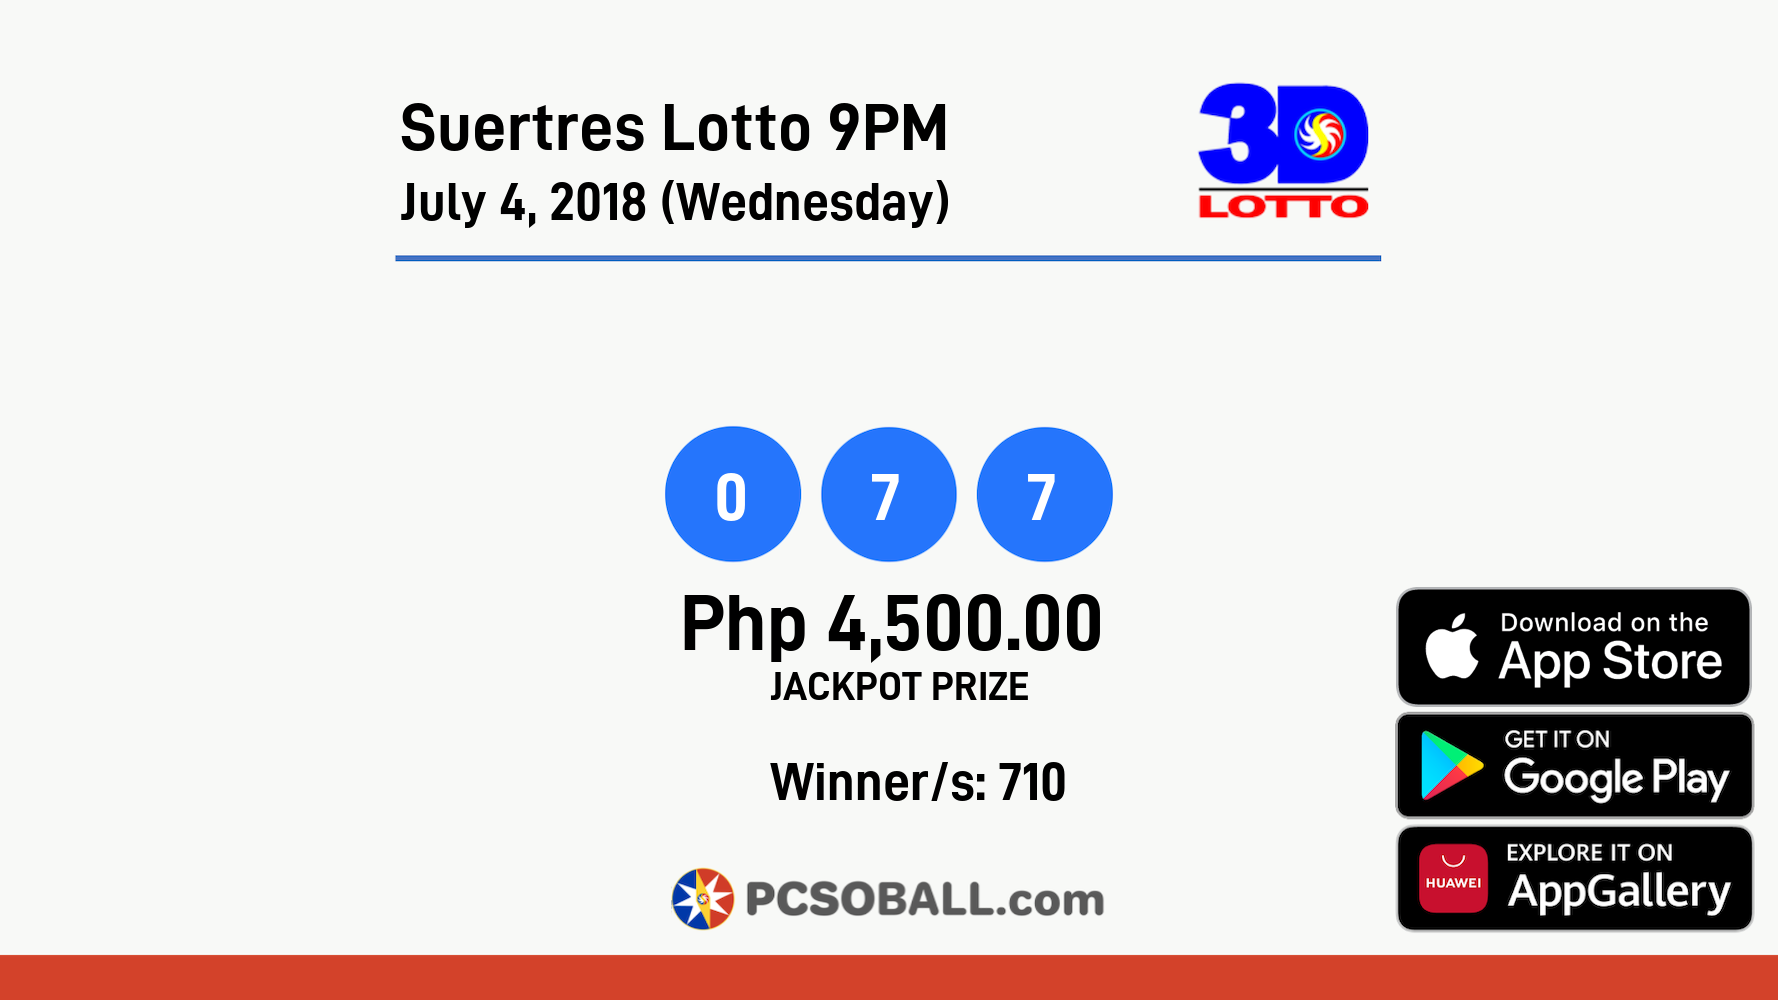 Suertres Lotto 9PM July 4, 2018 (Wednesday) Result